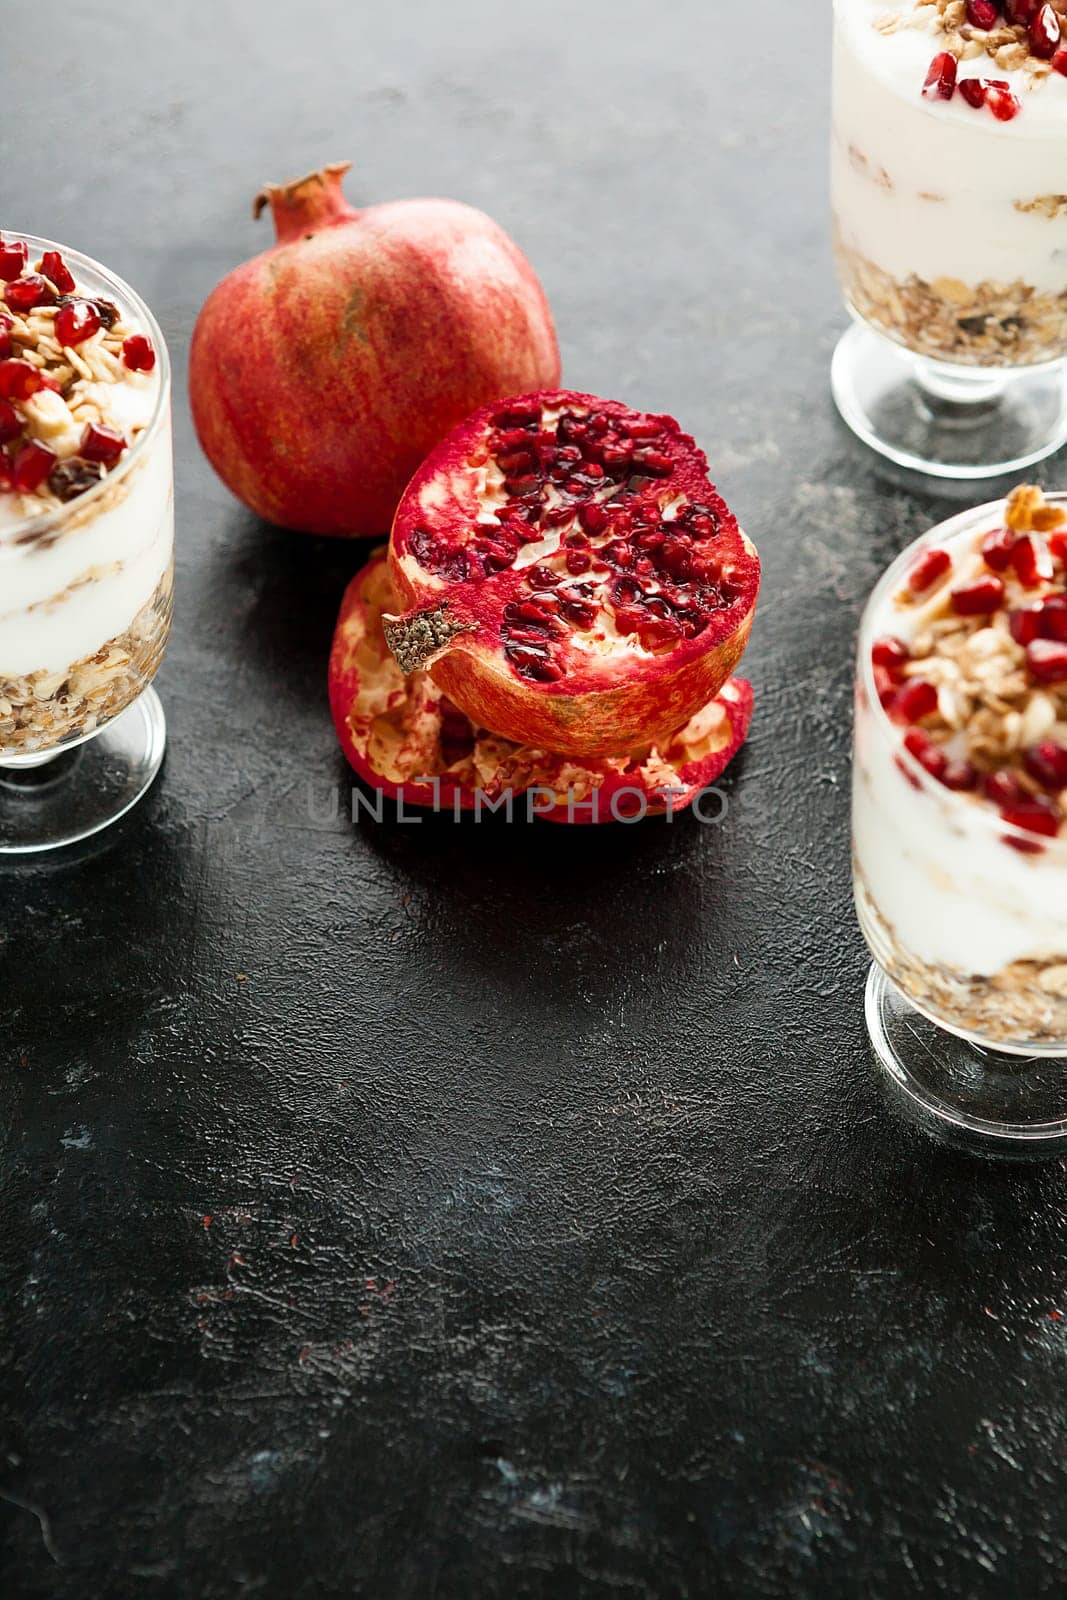 Pomegranate in the middle of home made desset by DCStudio